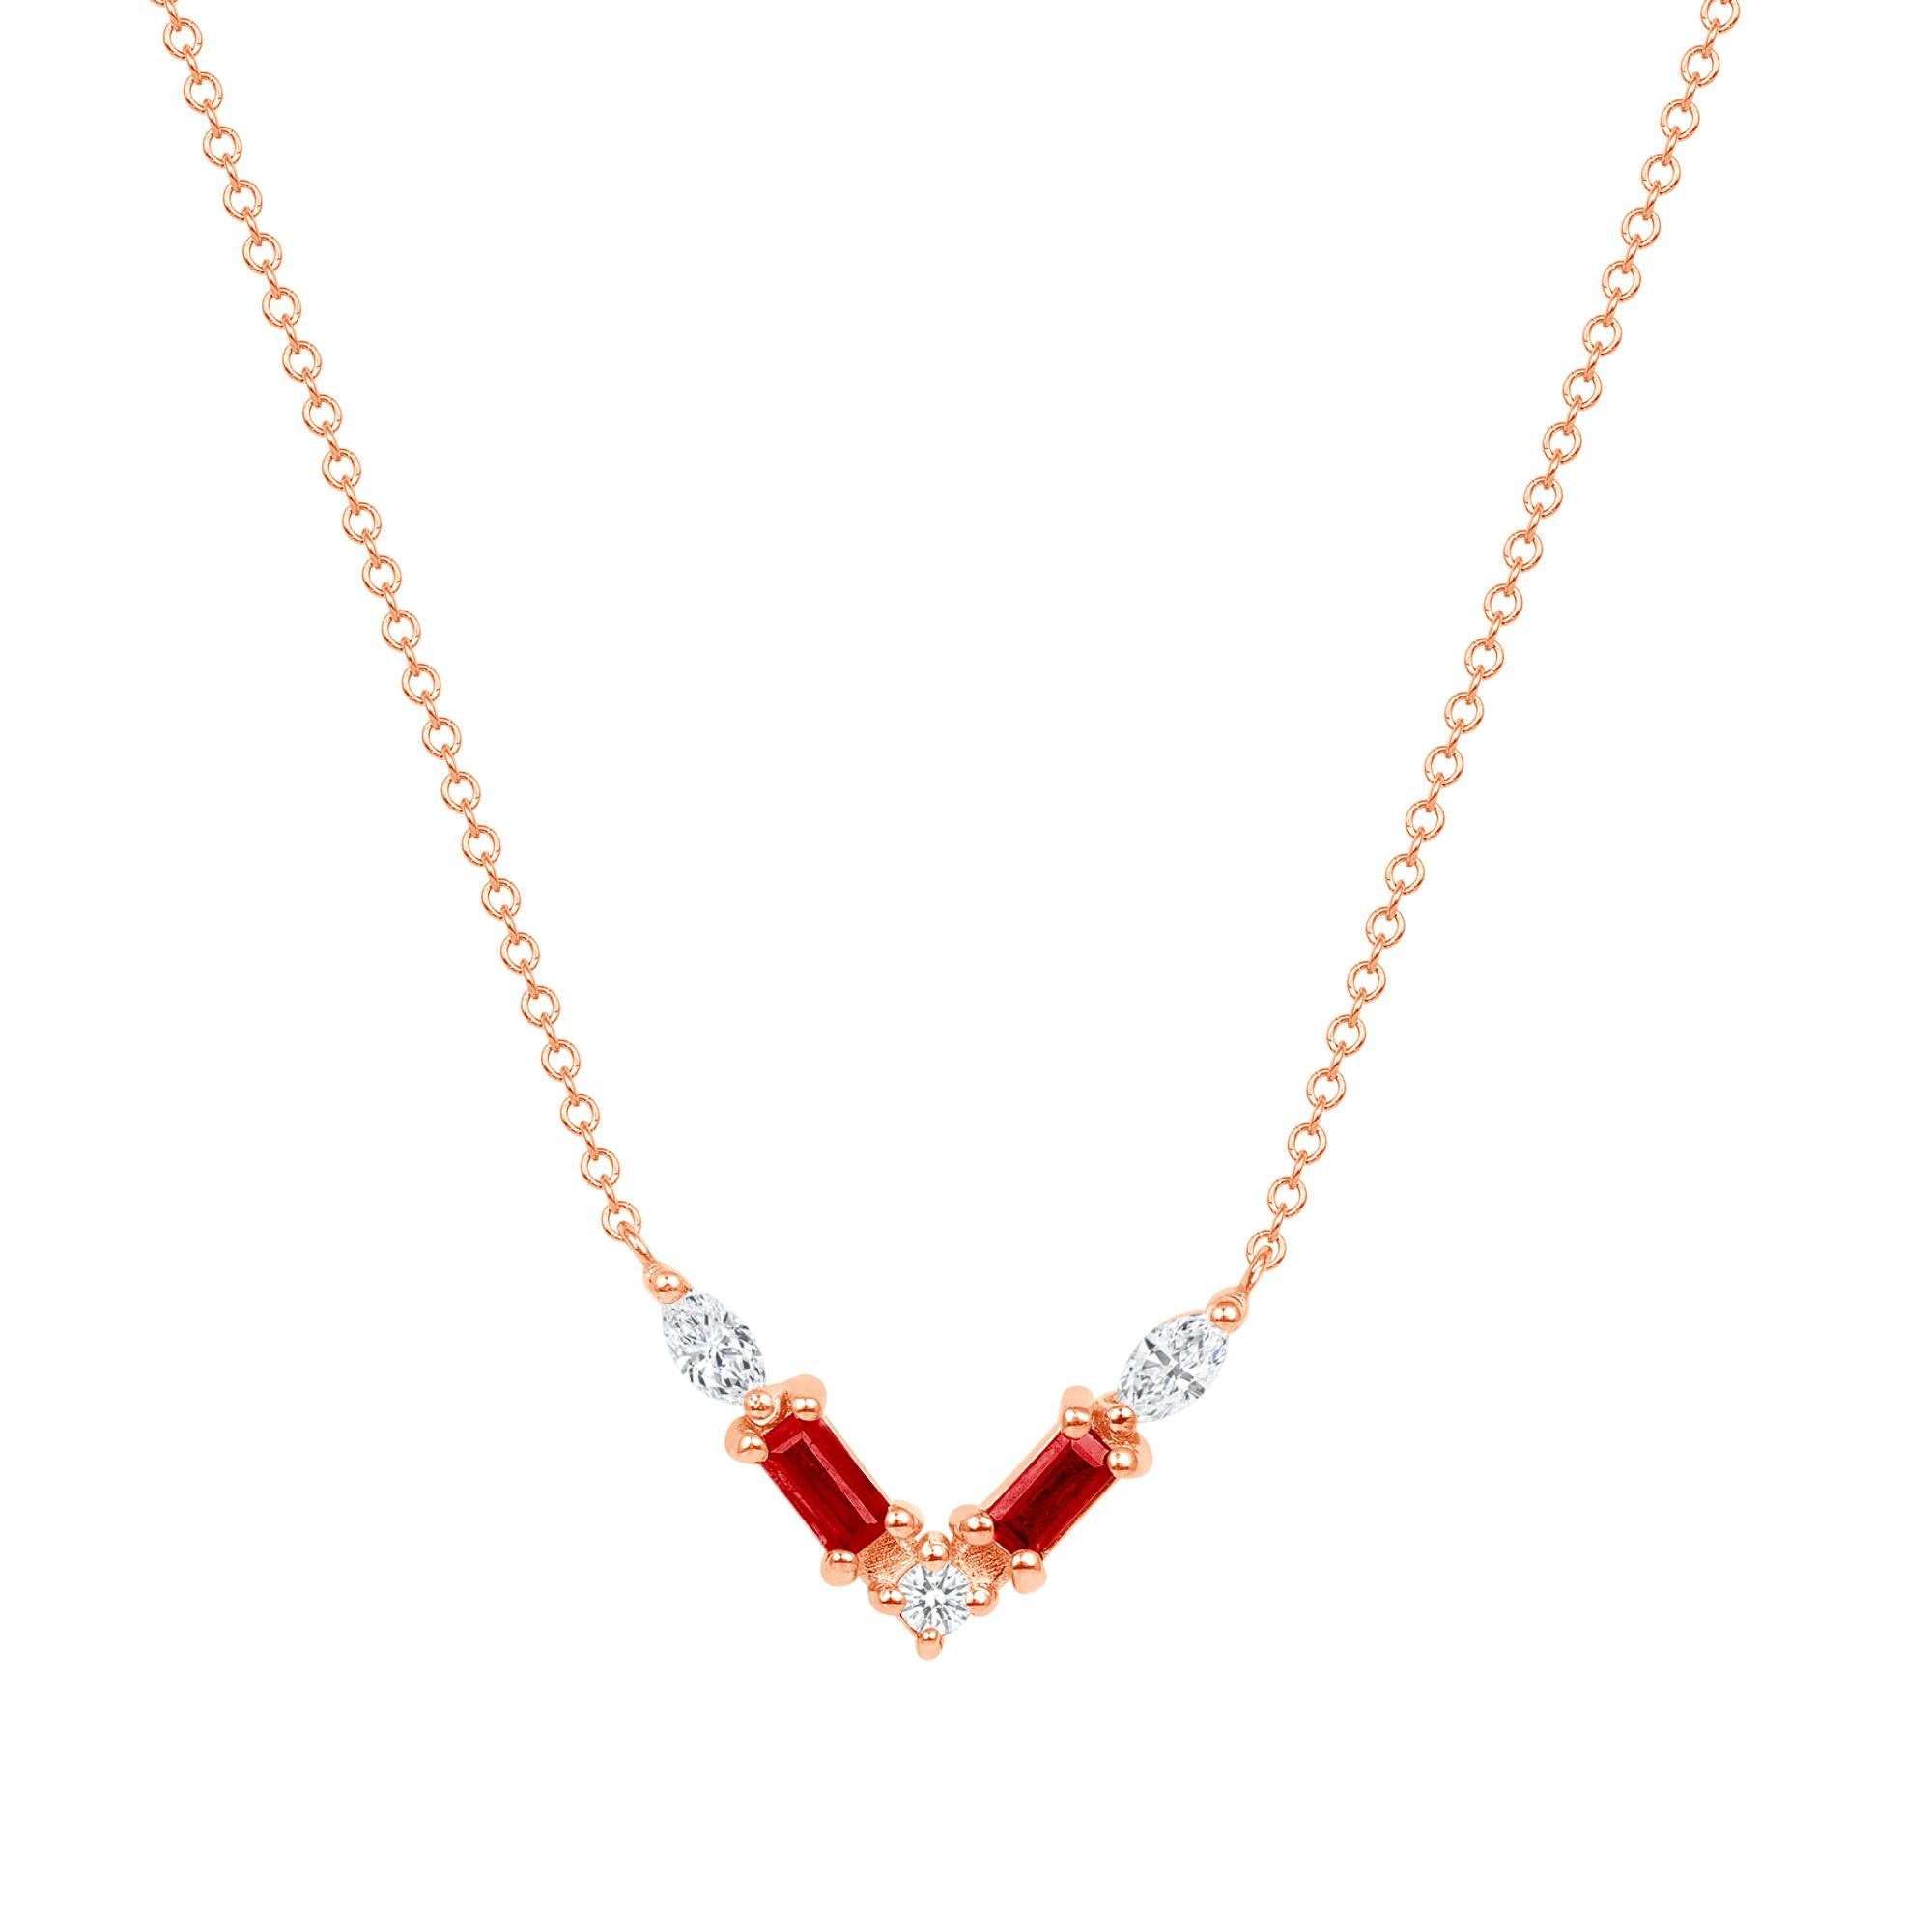 Crafted in 14K gold, this necklace features a thoughtfully arranged collection of ruby gemstones and diamond pavé, elegantly set along a V-shaped plane. Crafted in 14K white gold, it exudes delicacy and emotion, showcasing a captivating color